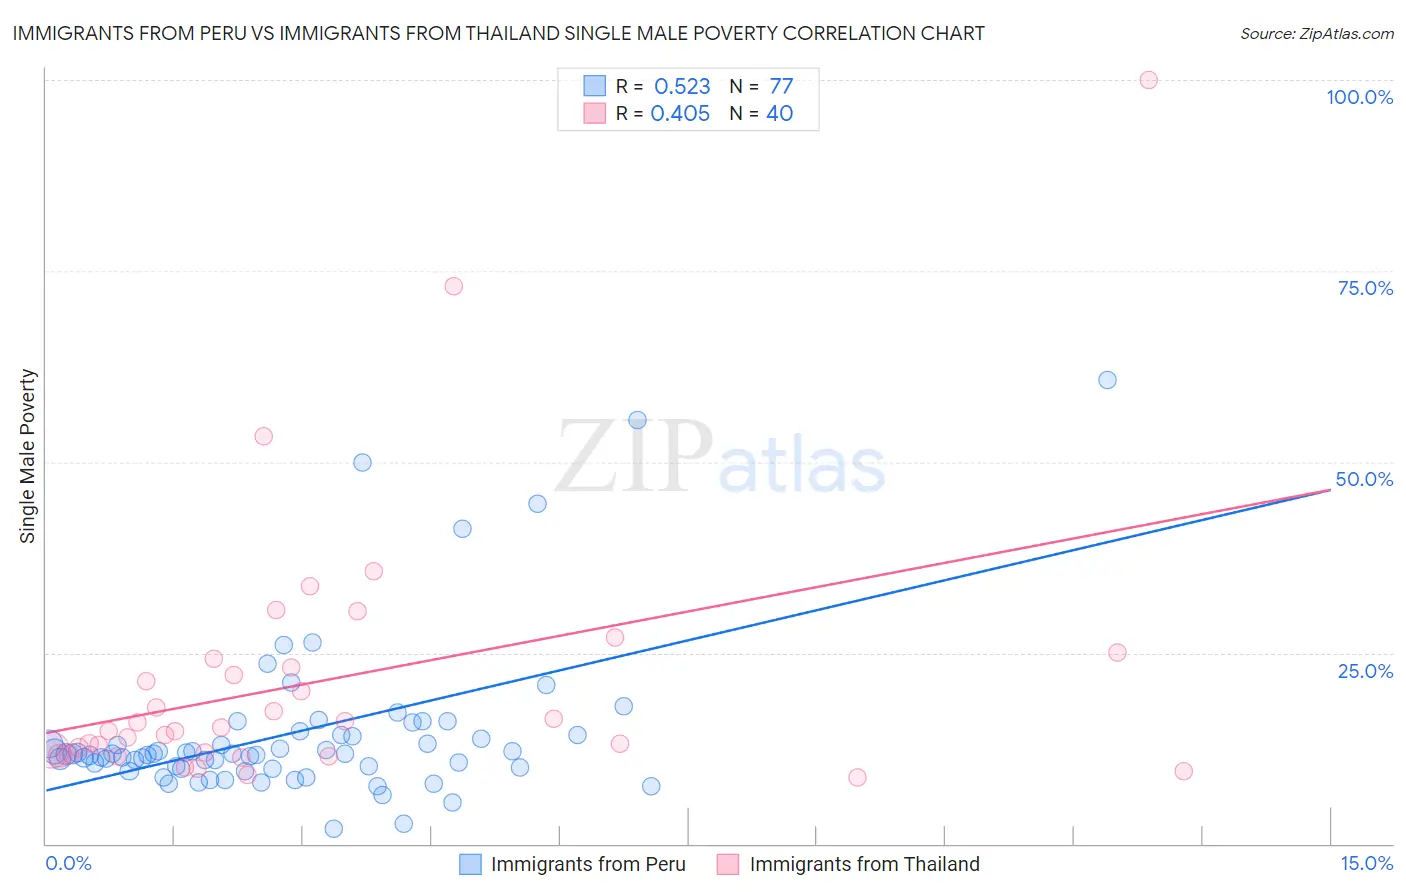 Immigrants from Peru vs Immigrants from Thailand Single Male Poverty